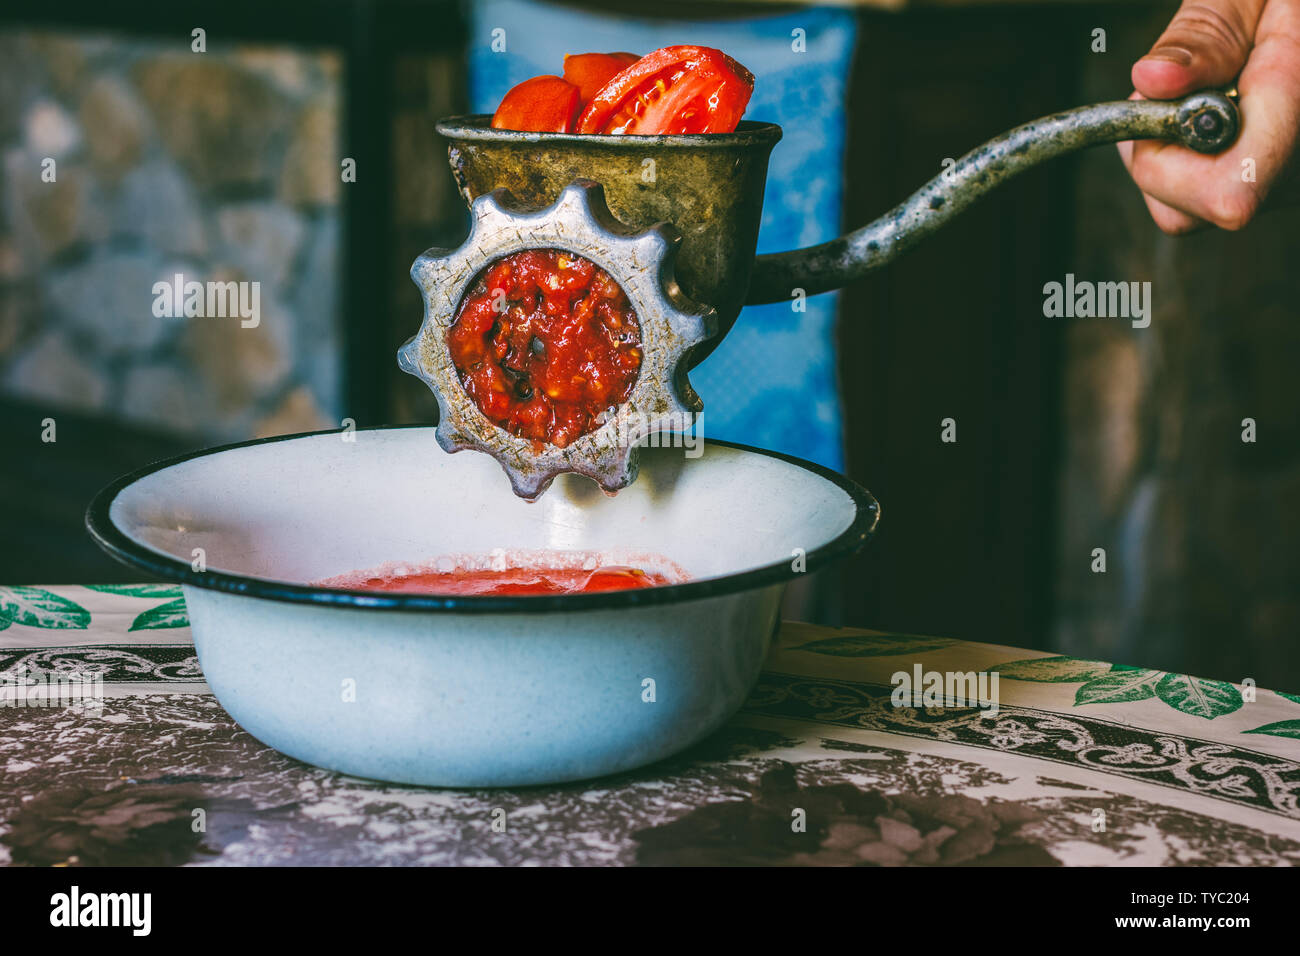 https://c8.alamy.com/comp/TYC204/man-hand-turns-the-handle-grinds-in-an-old-meat-grinder-tomatoes-for-making-lecho-sauce-TYC204.jpg